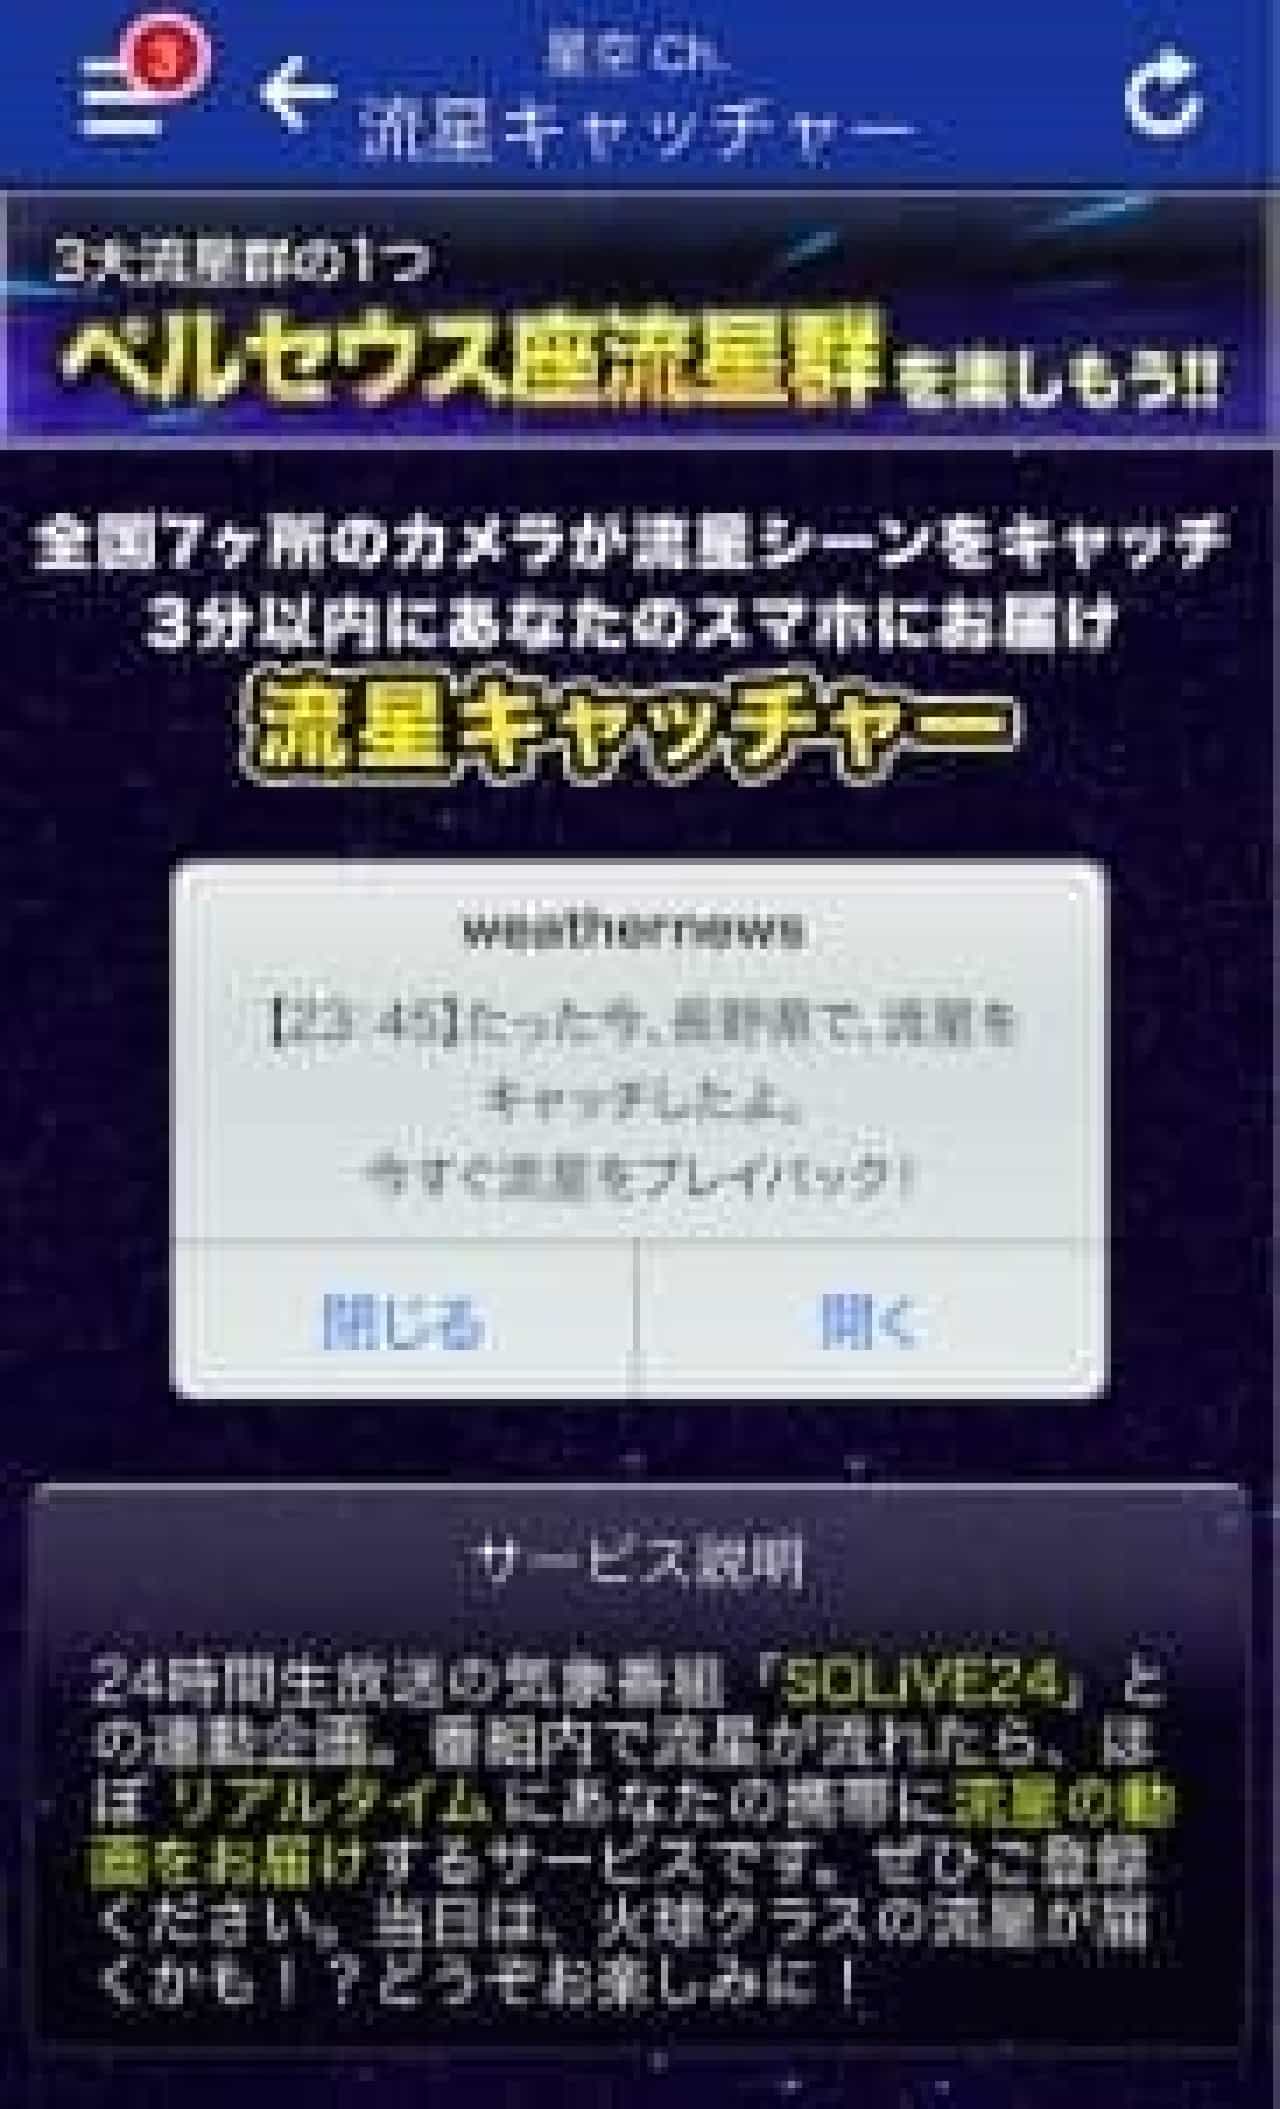 The latest information on Weathernews "Perseids Meteor Shower"